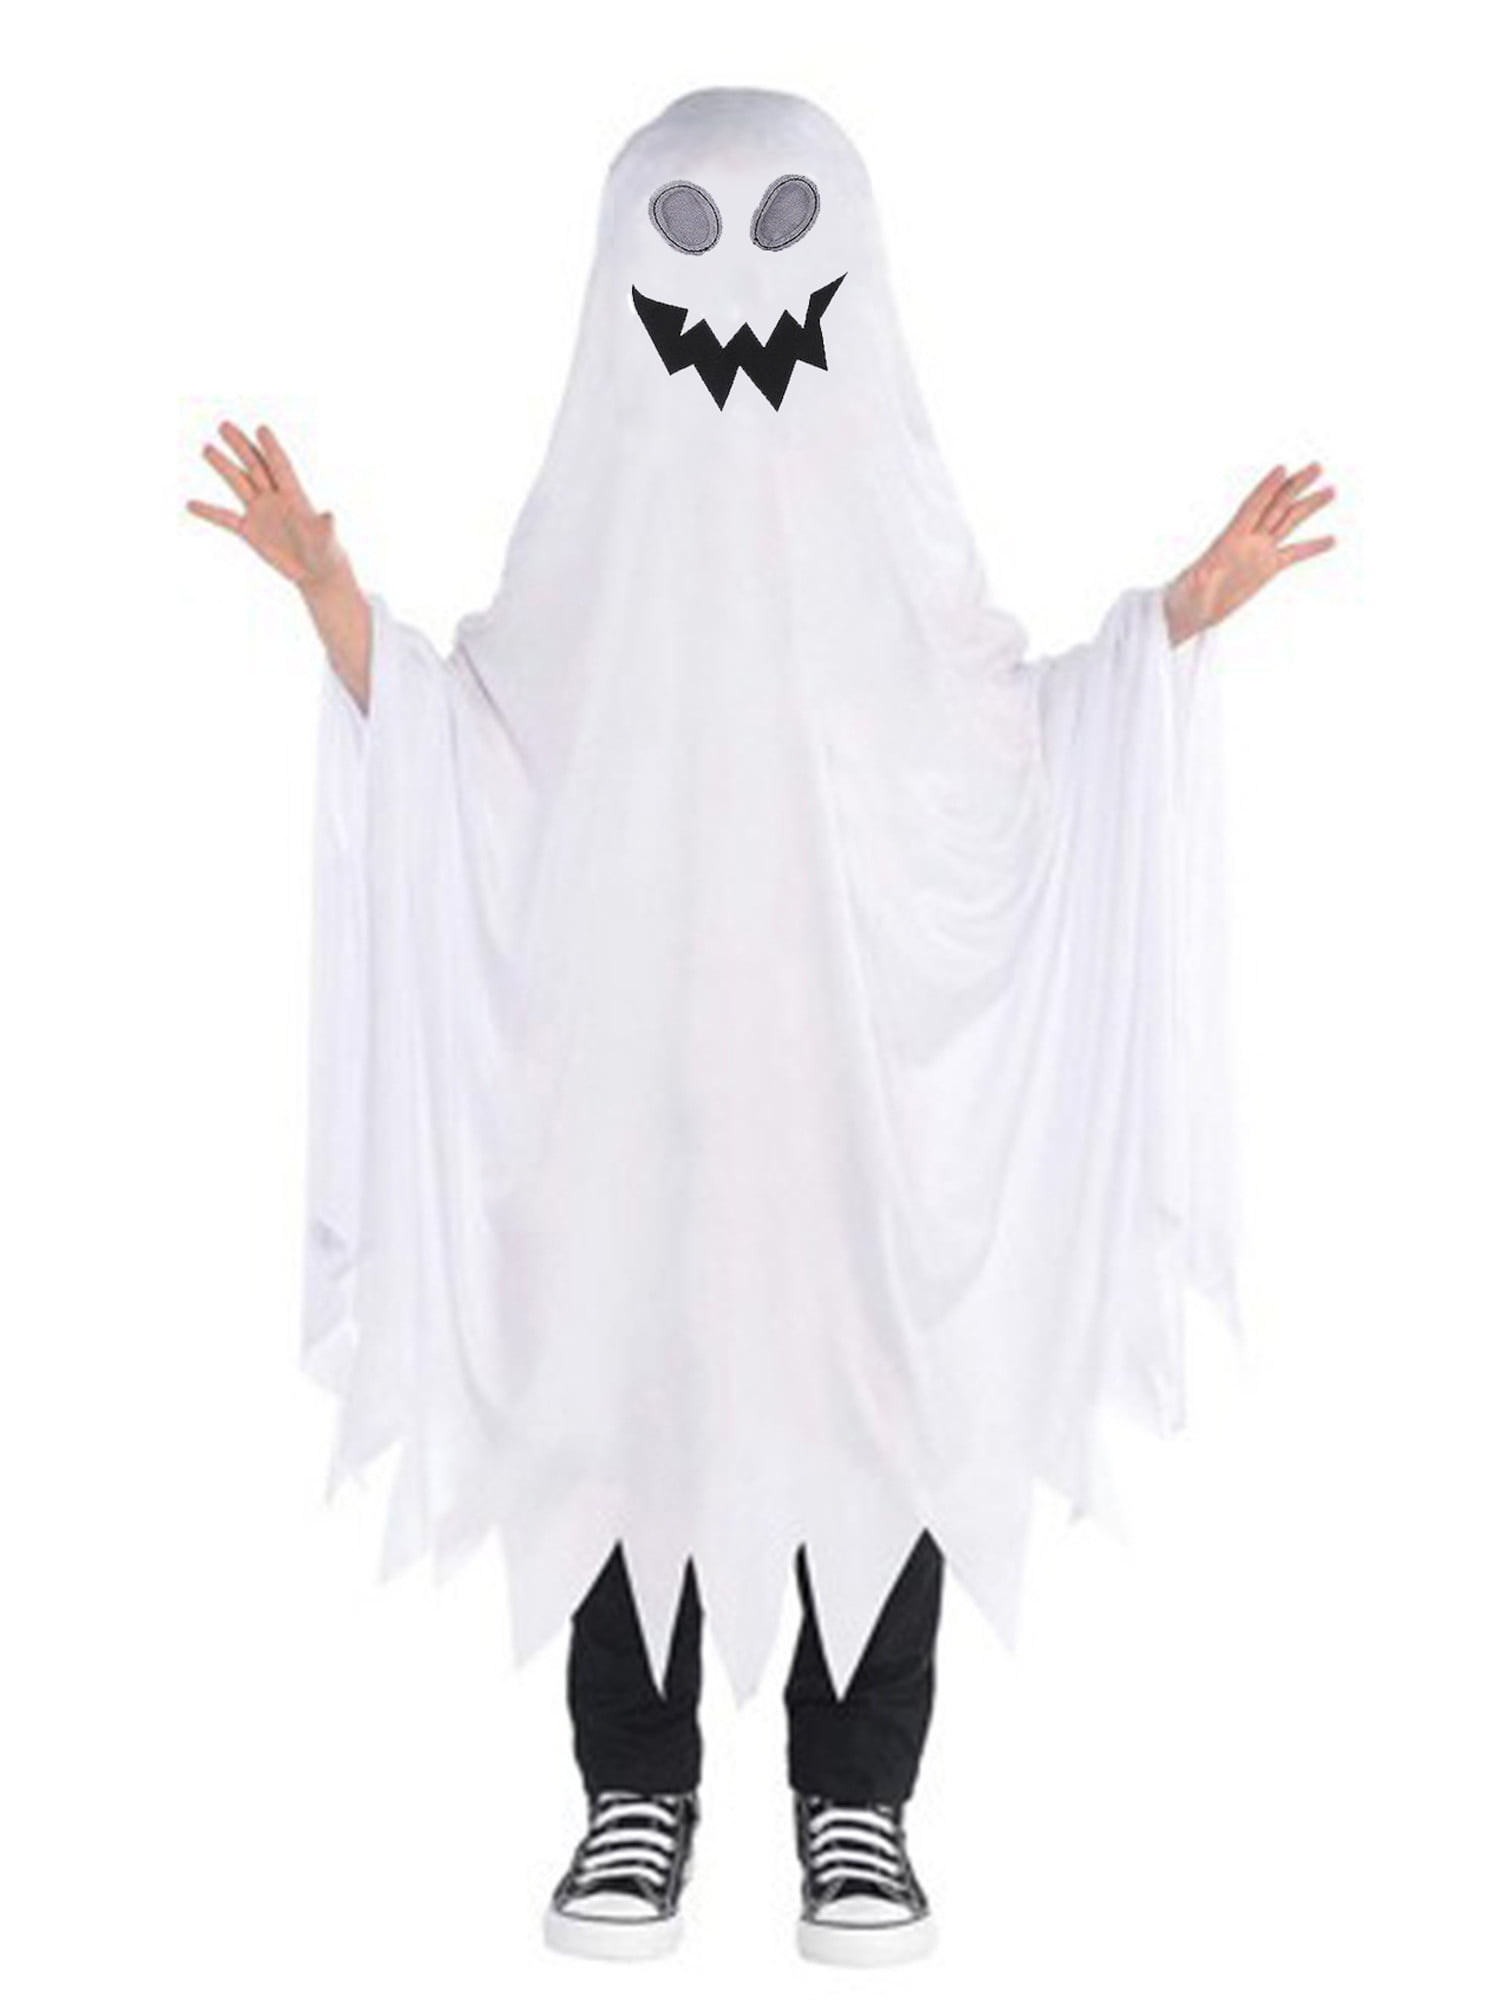 Howling Ghost Boy Costume Small Year 3-4 New.